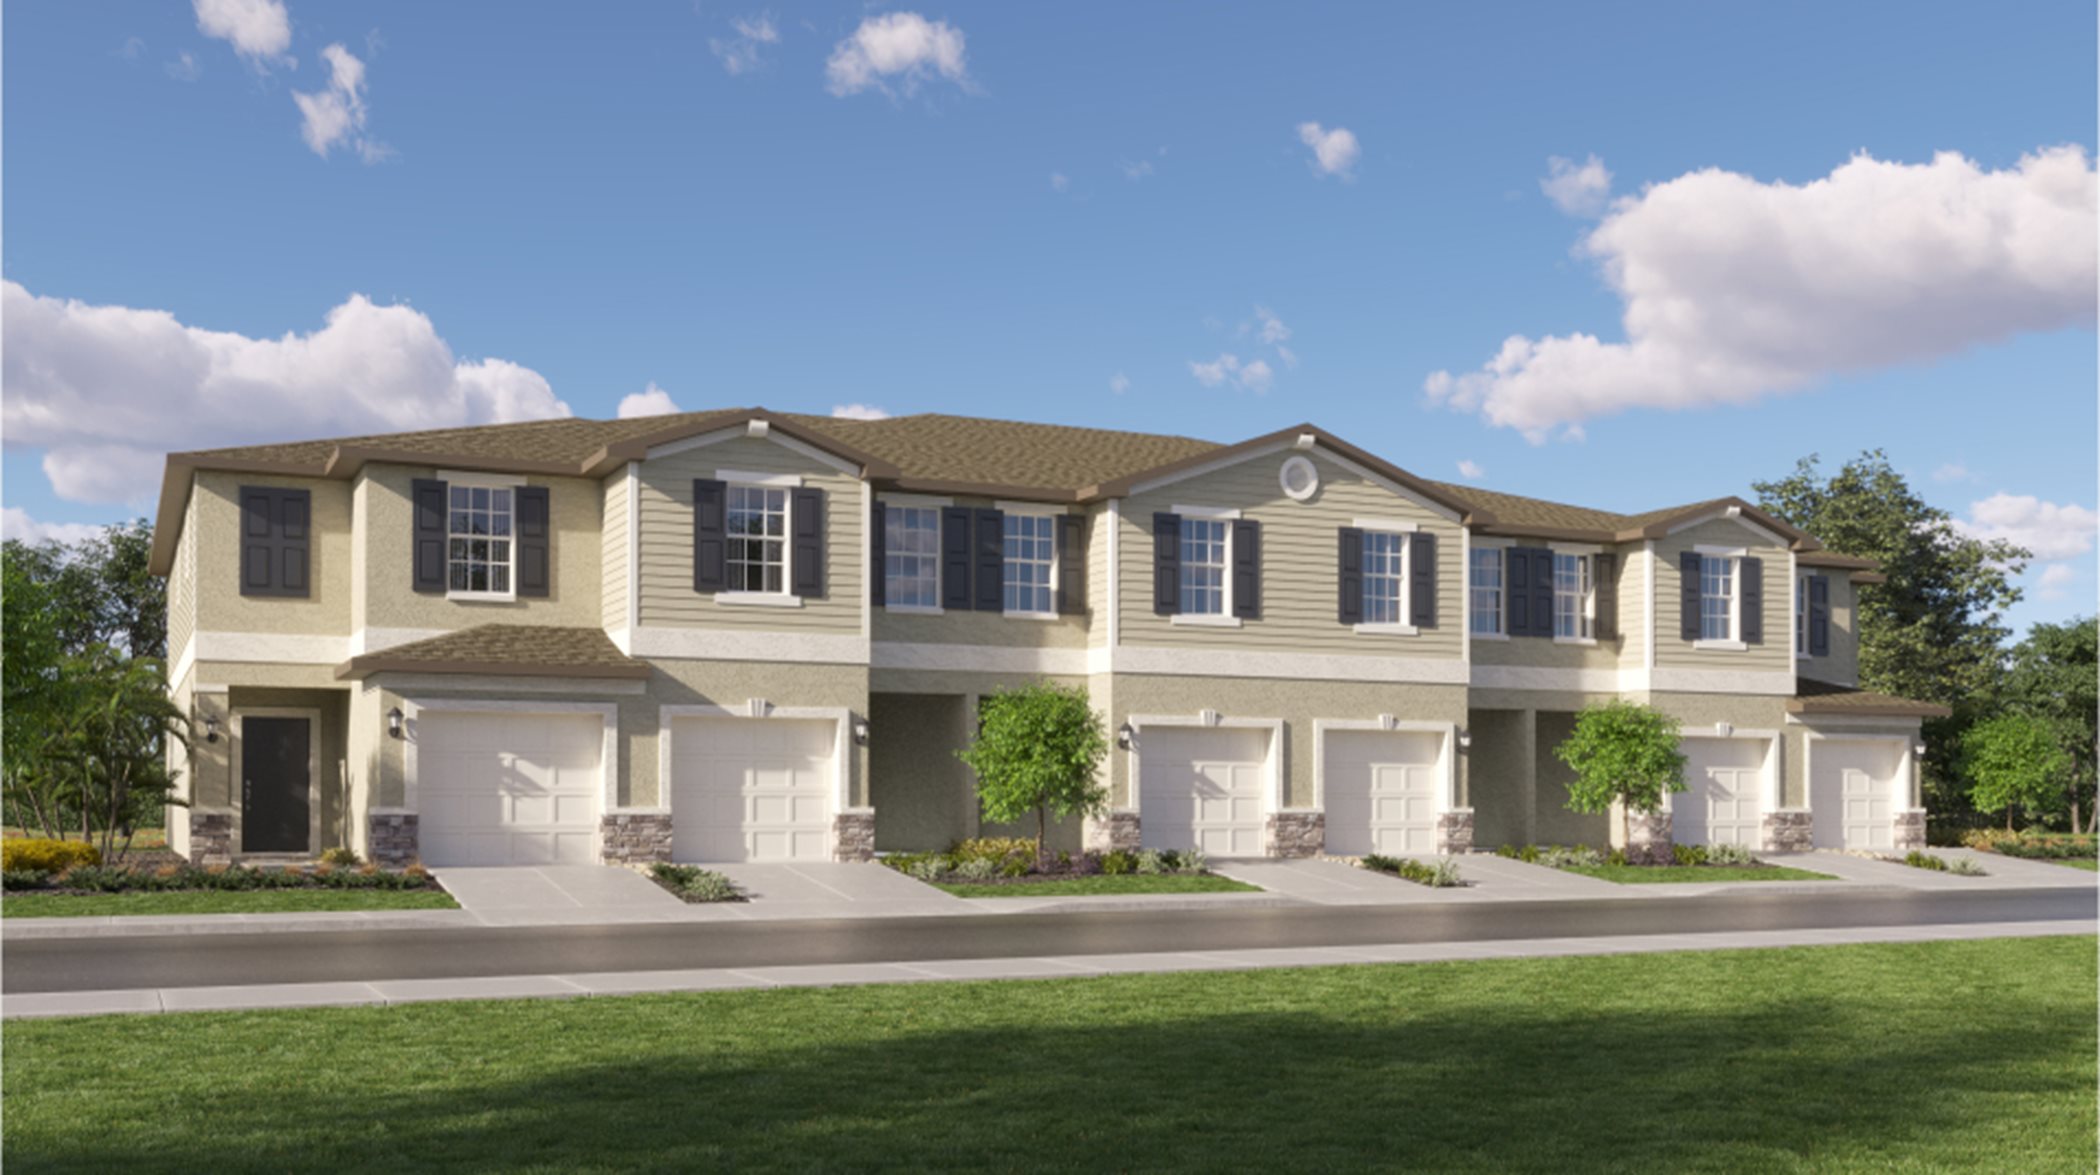 Townhomes exterior